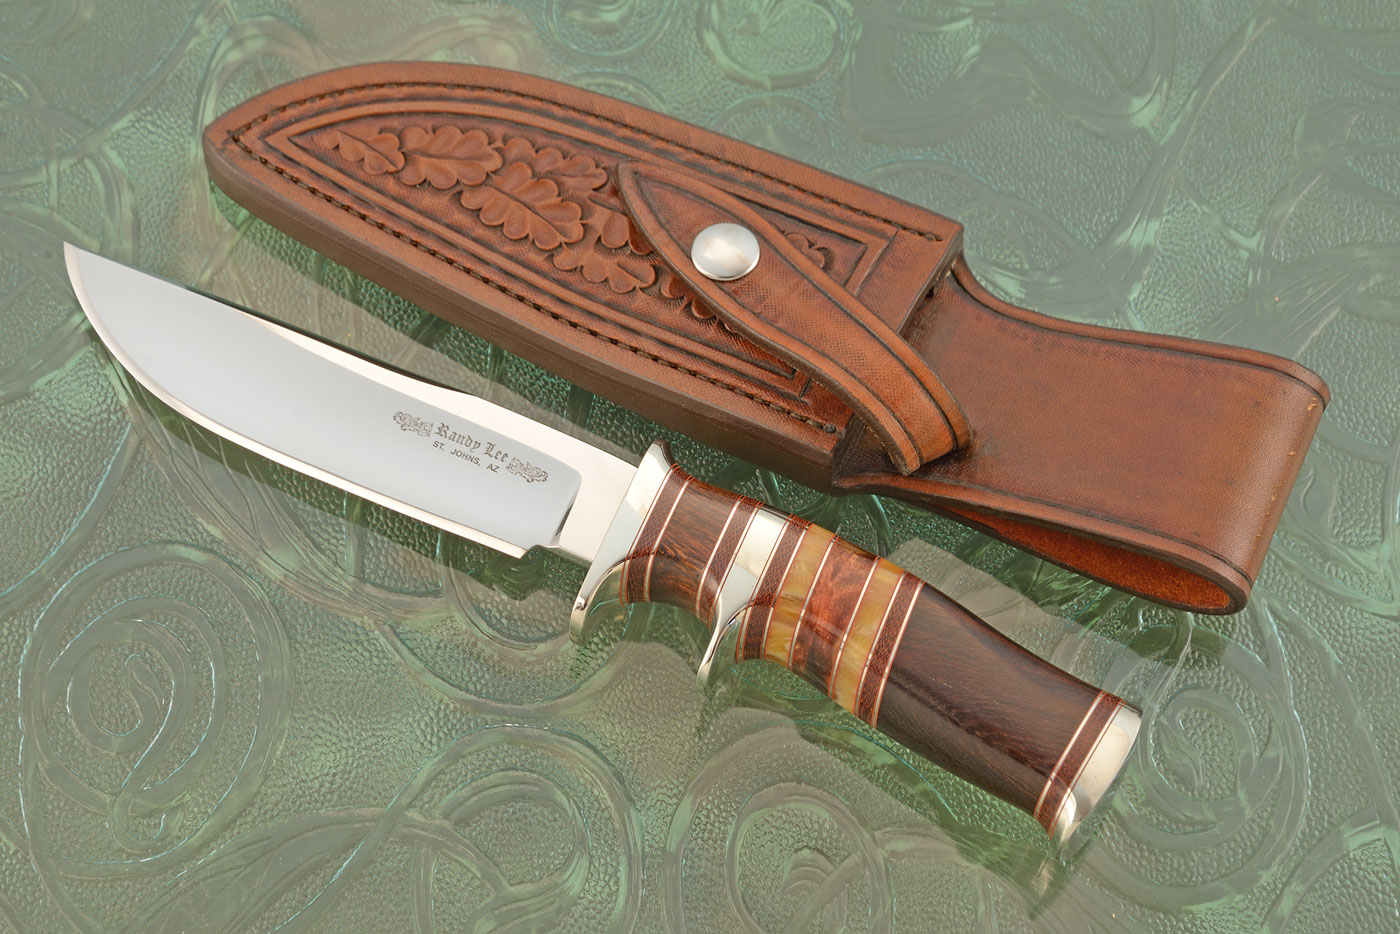 Sub-Hilt Fighter with Ironwood, Micarta, and Amber